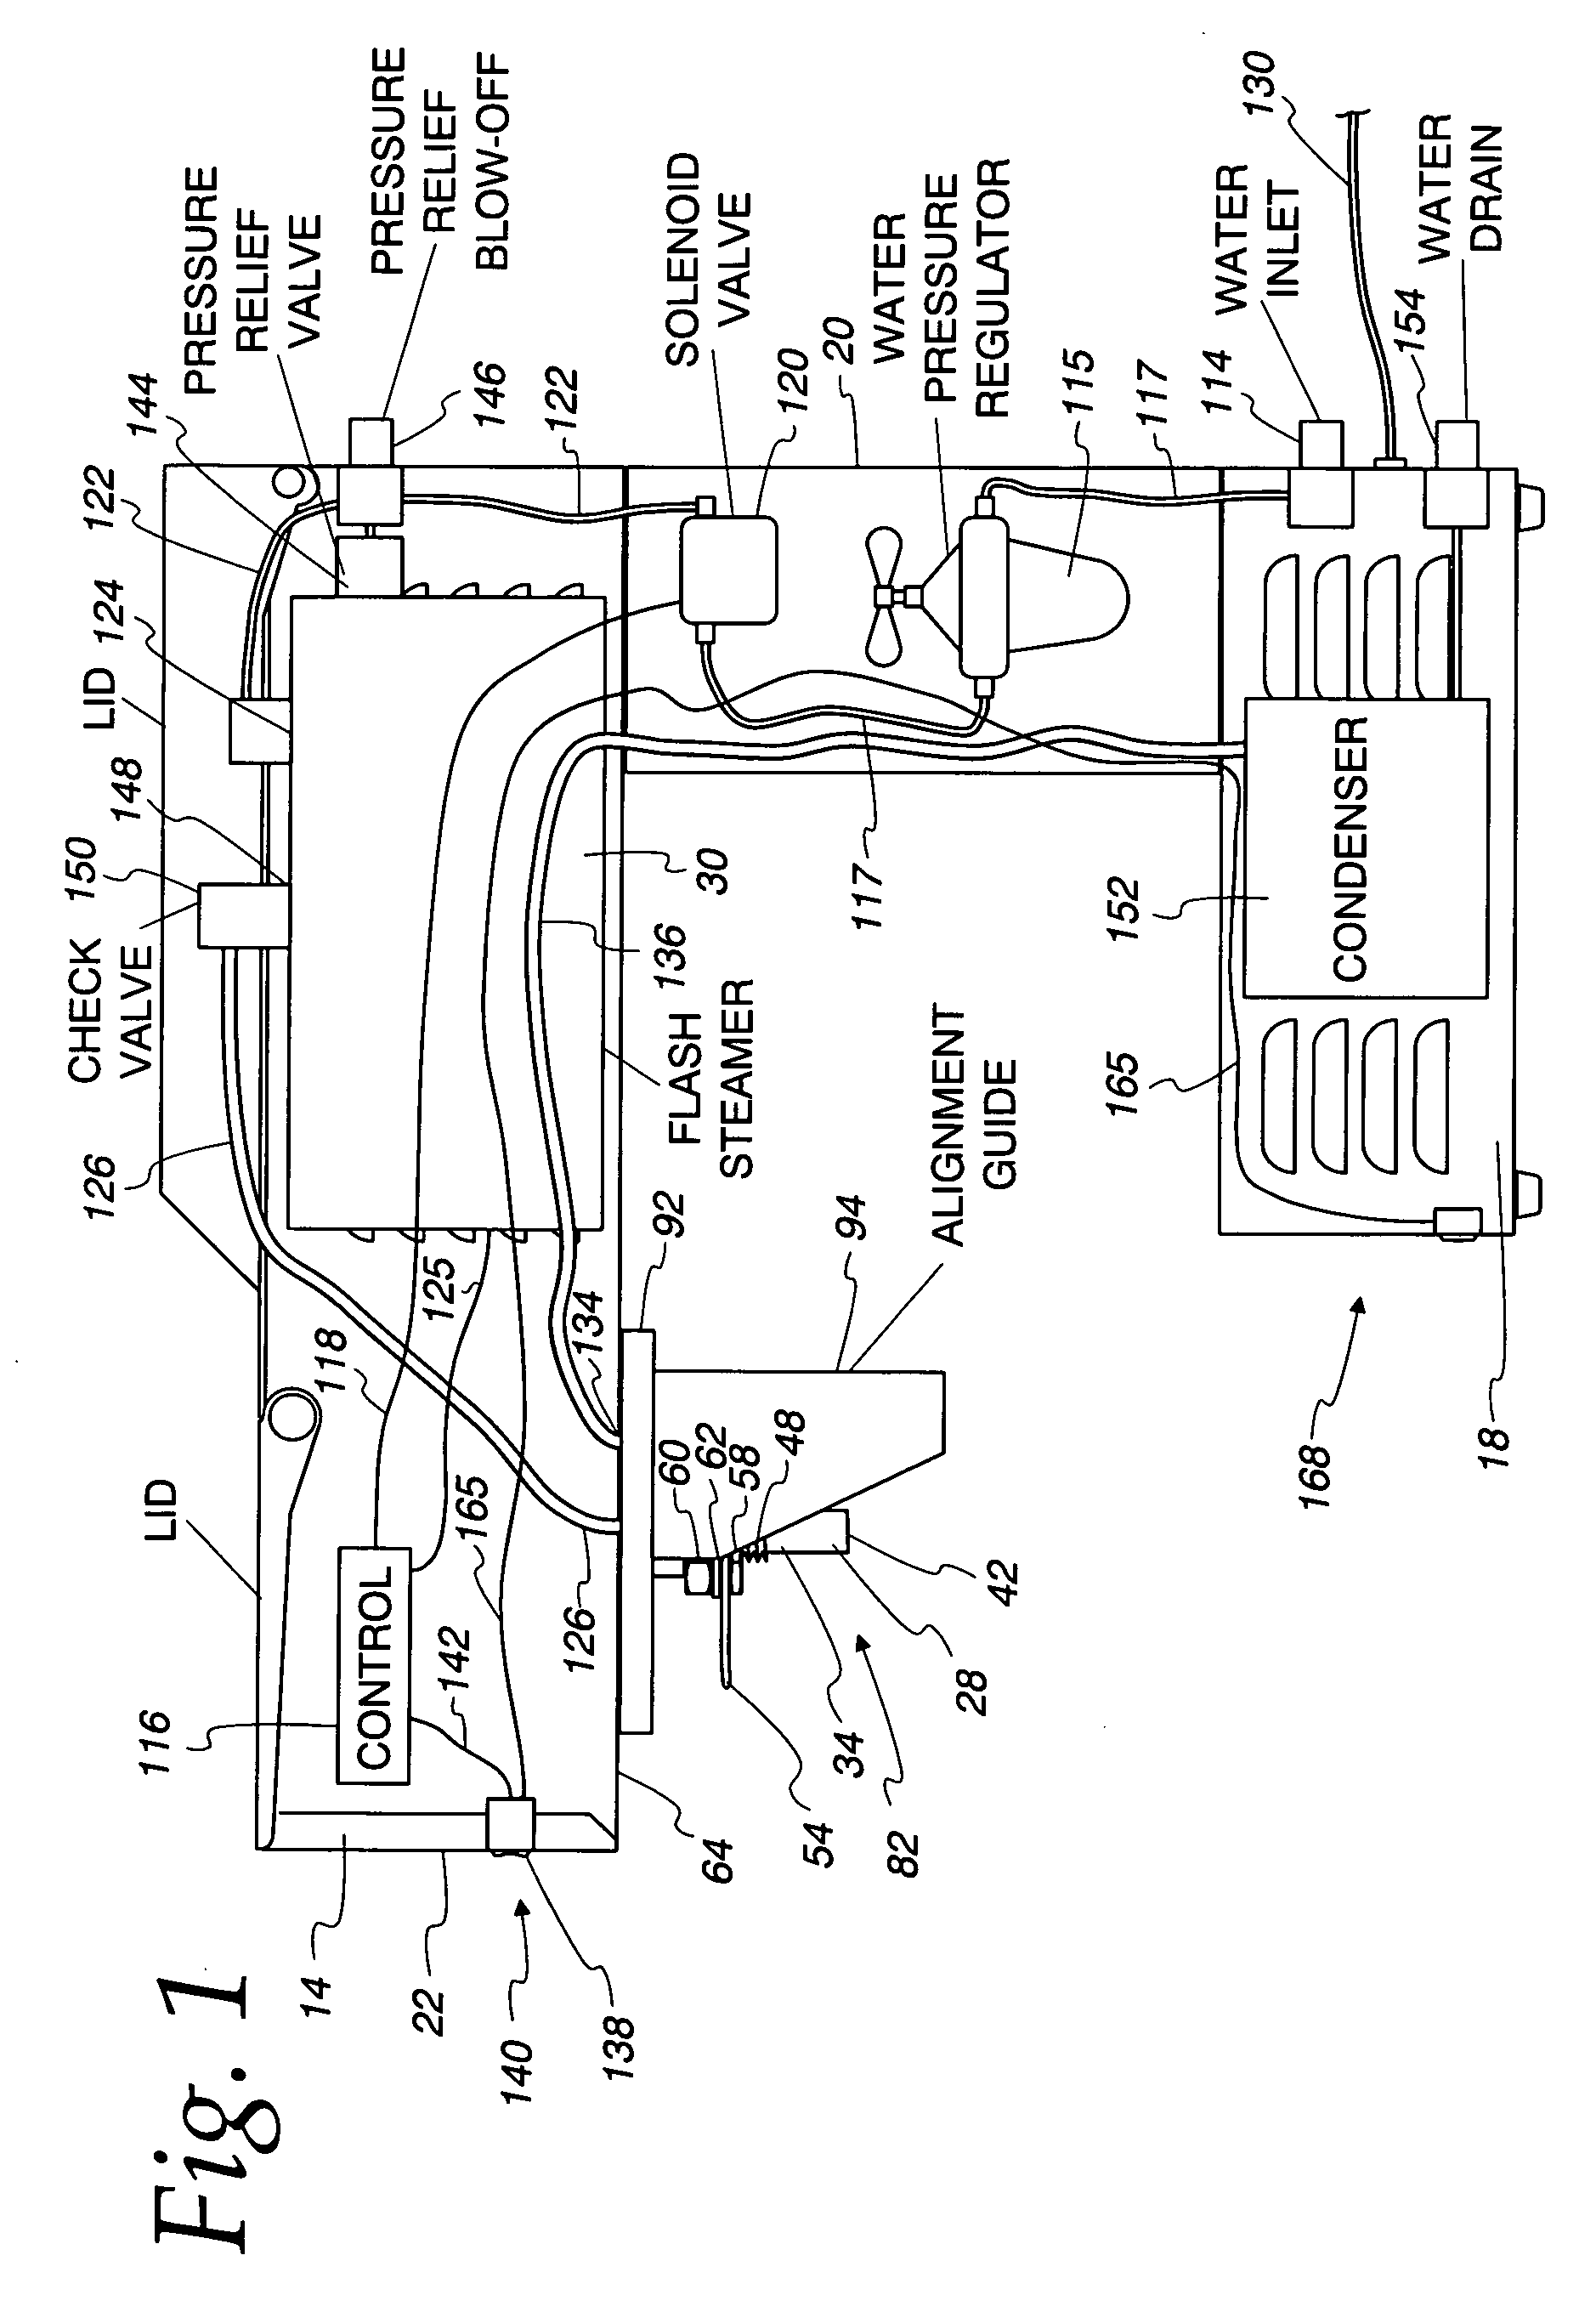 Steam injection cooking device and method